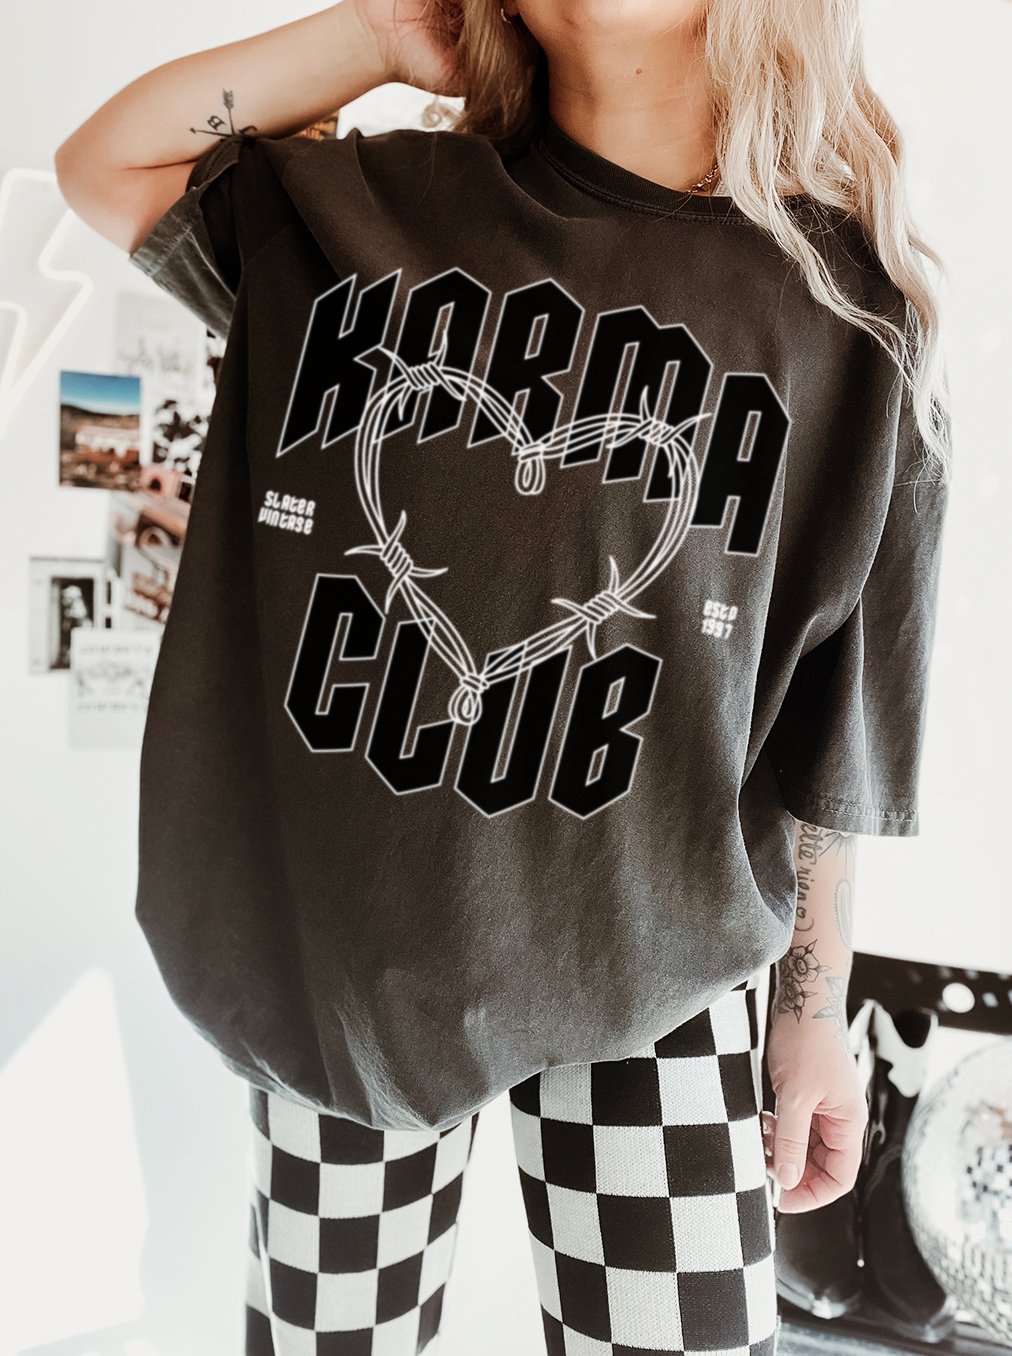 Karma Club Trendy Graphic Barbed Wire Vintage T-Shirt - Rise and Redemption